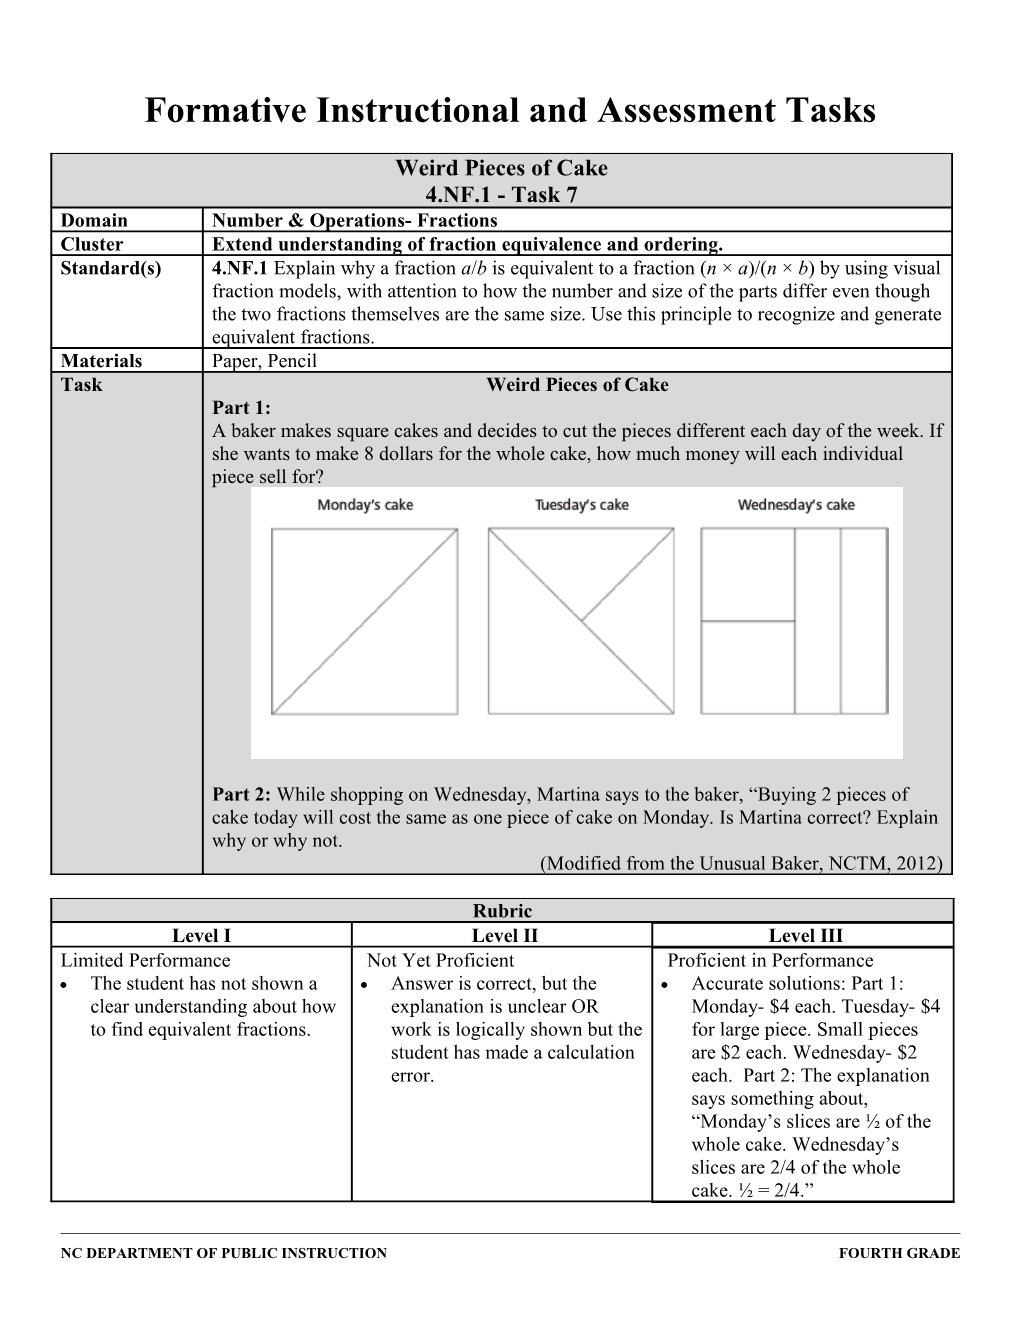 Formative Instructional and Assessment Tasks s5